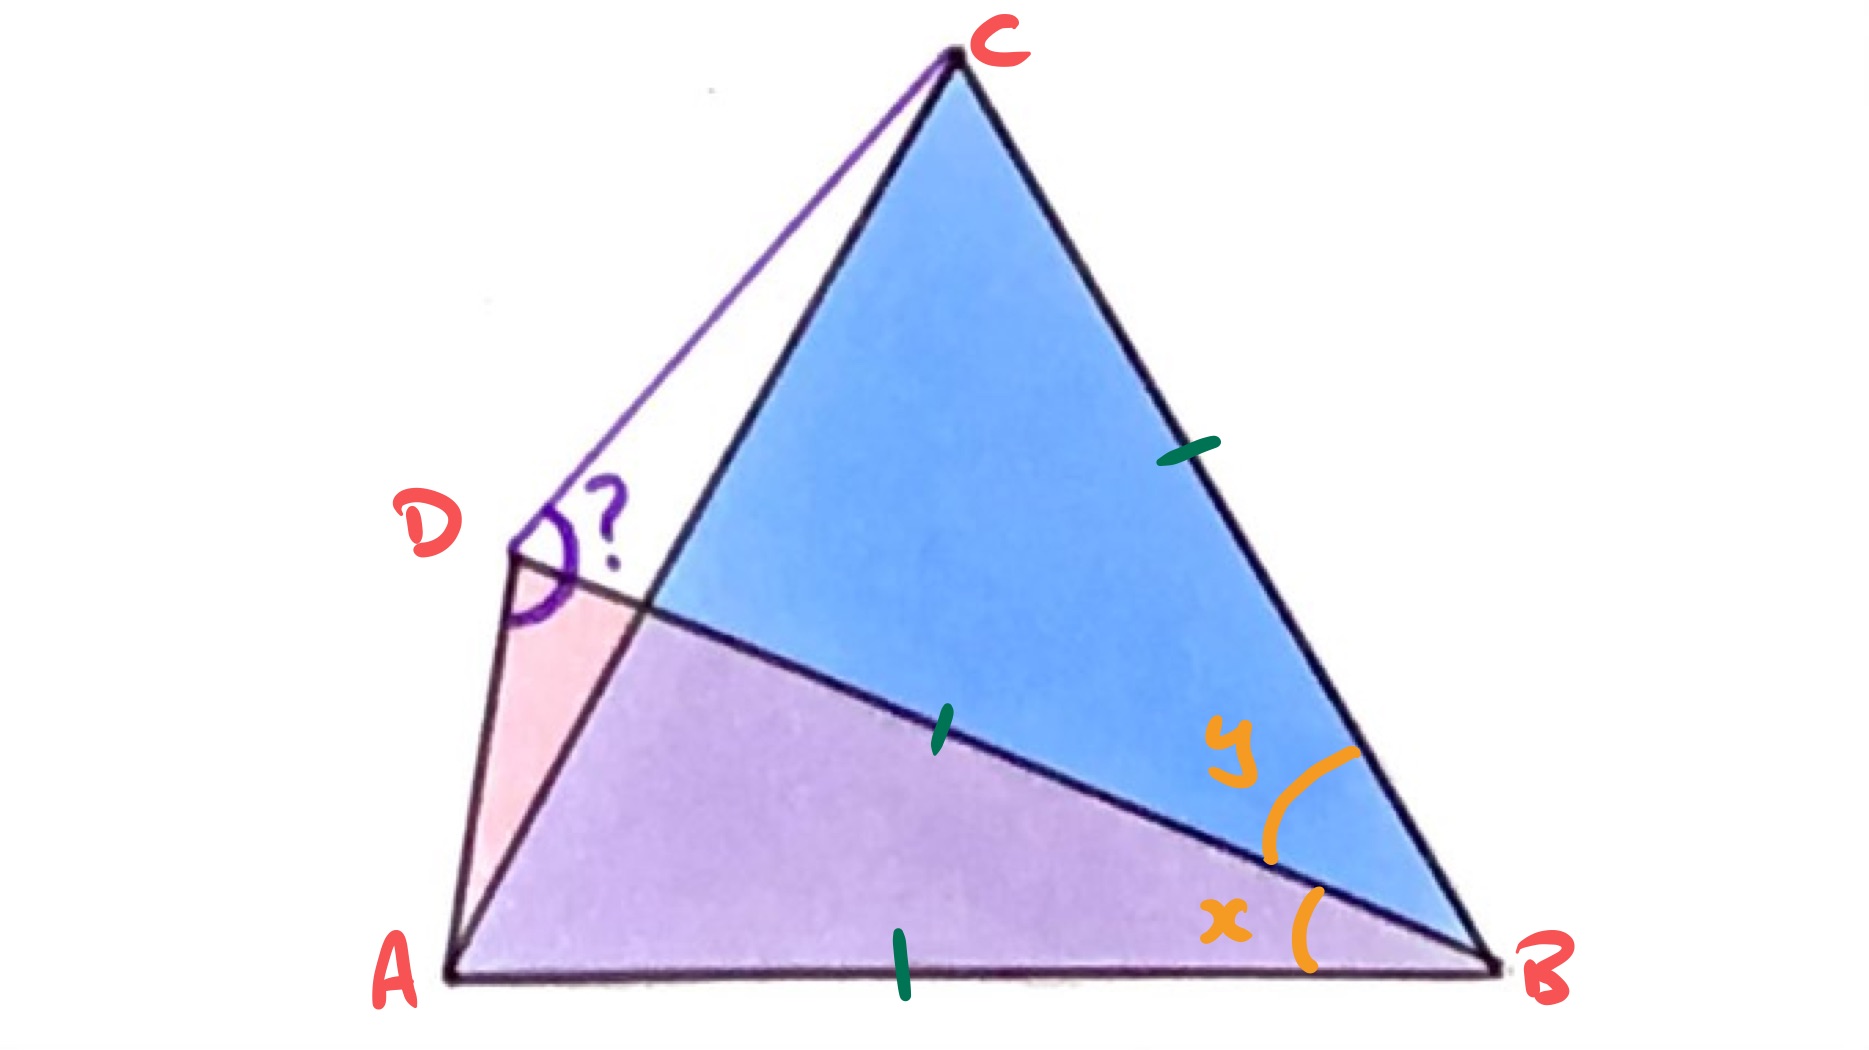 Isosceles and Equilateral Triangles Labelled